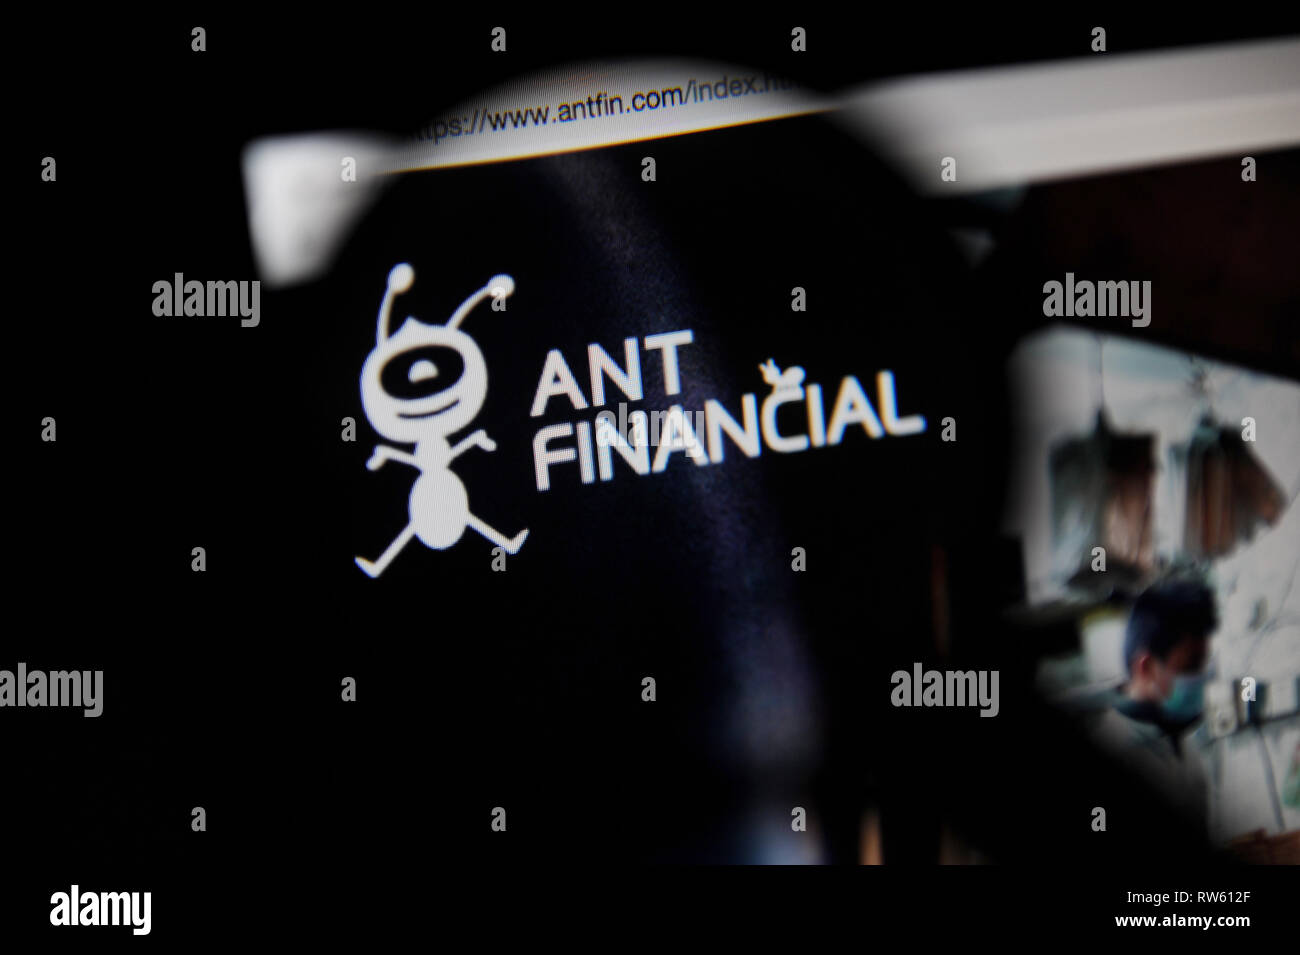 The Ant Financial website seen through a magnifying glass Stock Photo